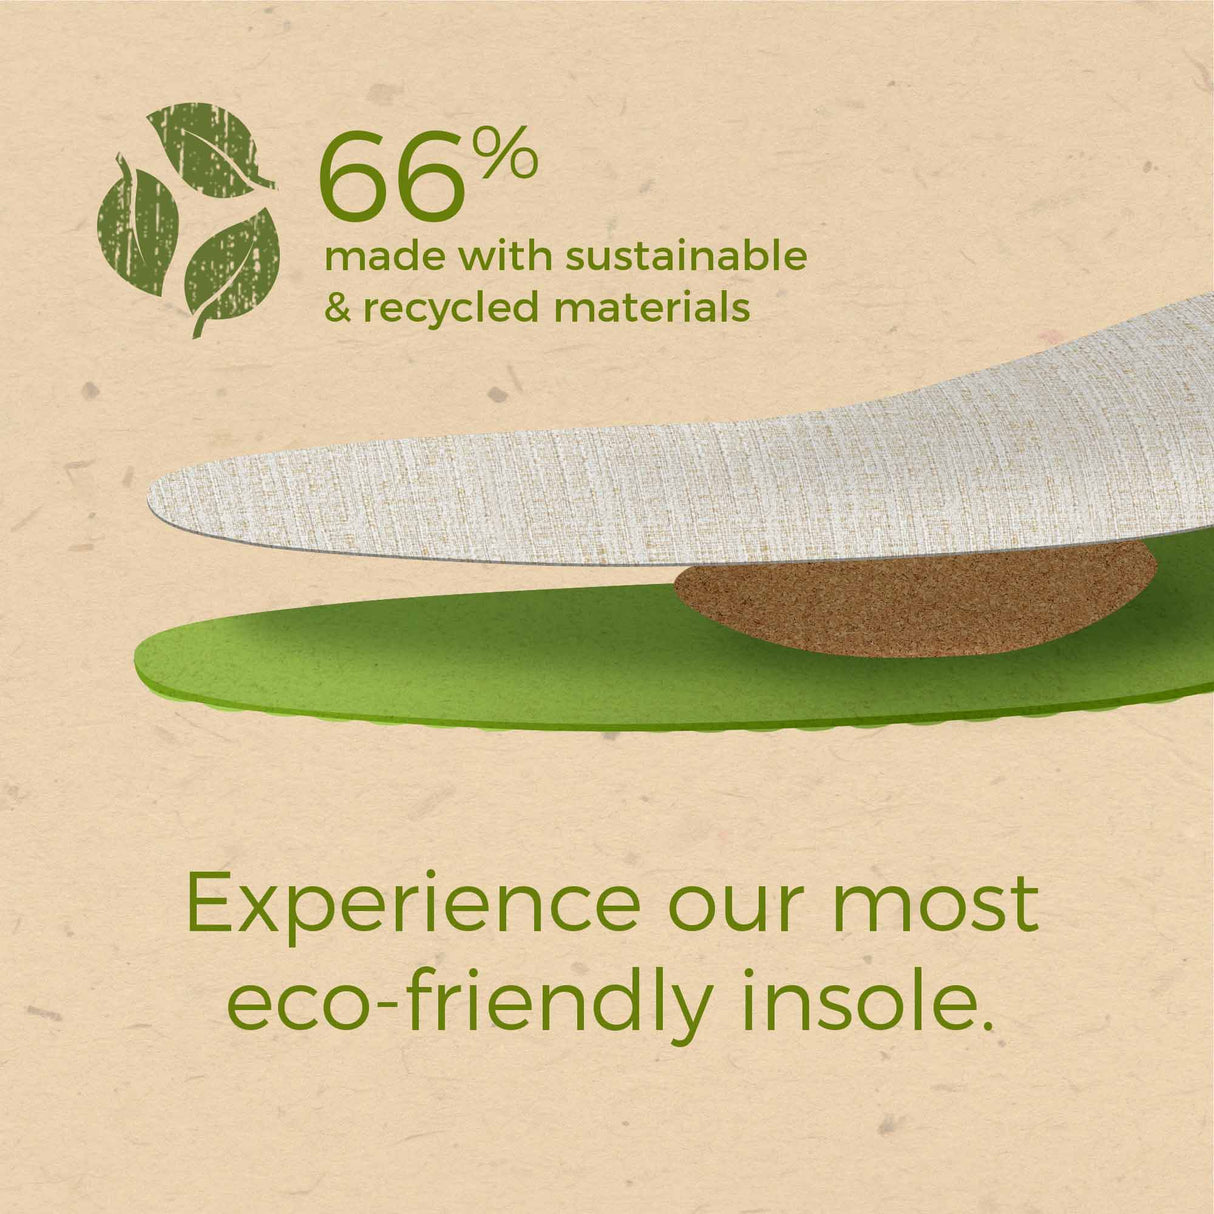 eco foam insoles are 66% made with sustainable and recycled materials